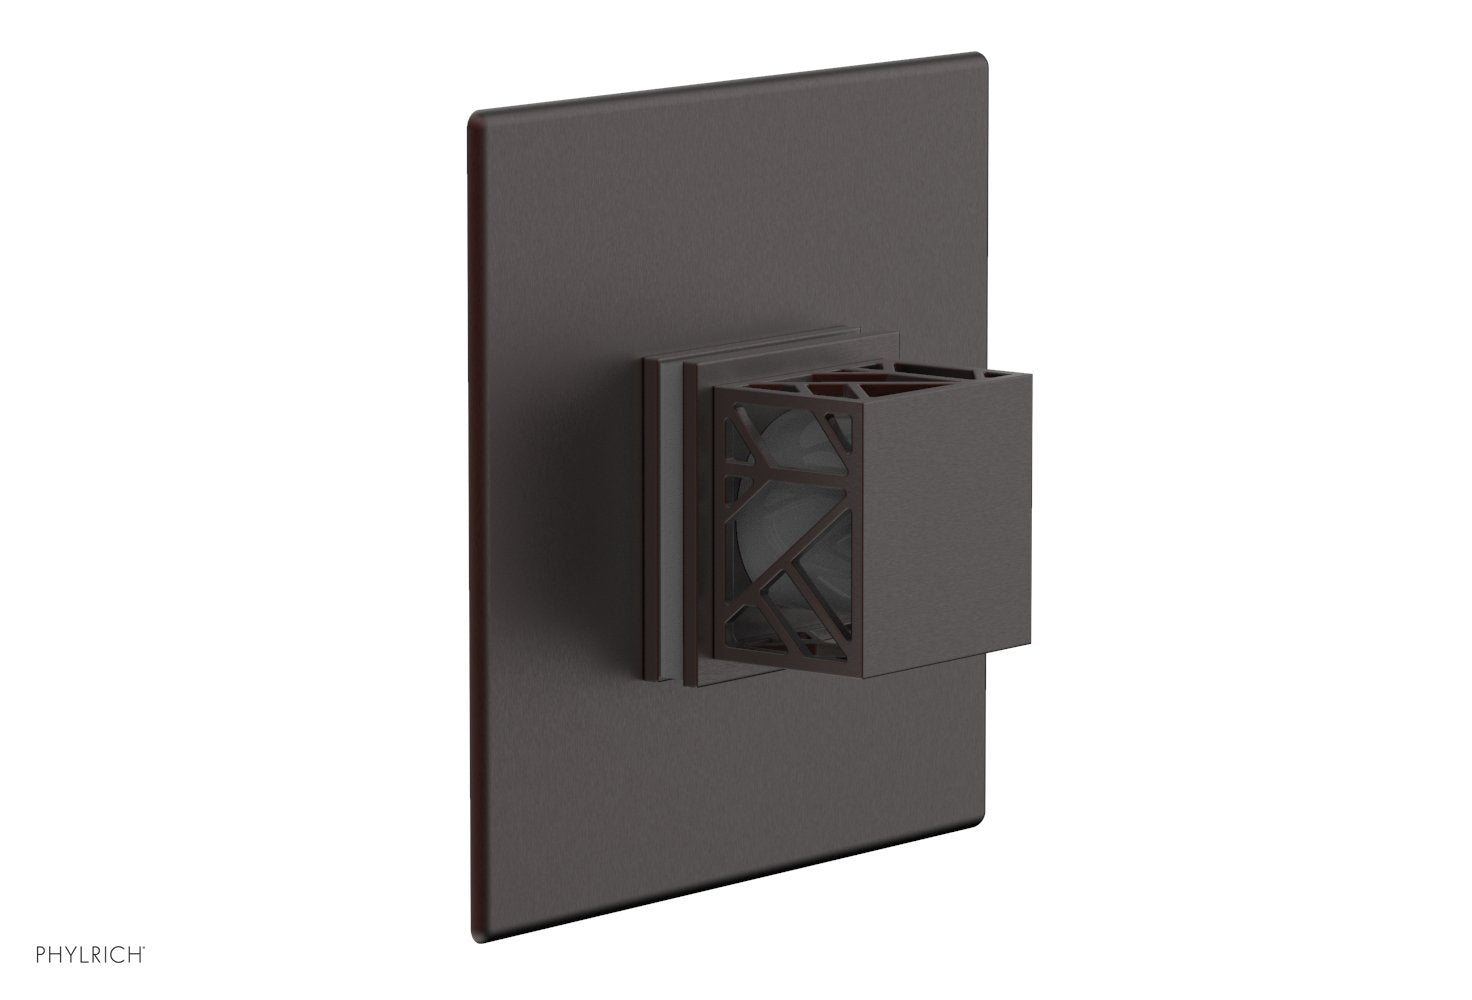 Phylrich JOLIE Pressure Balance Shower Plate & Handle Trim, Square Handle with "Grey" Accents